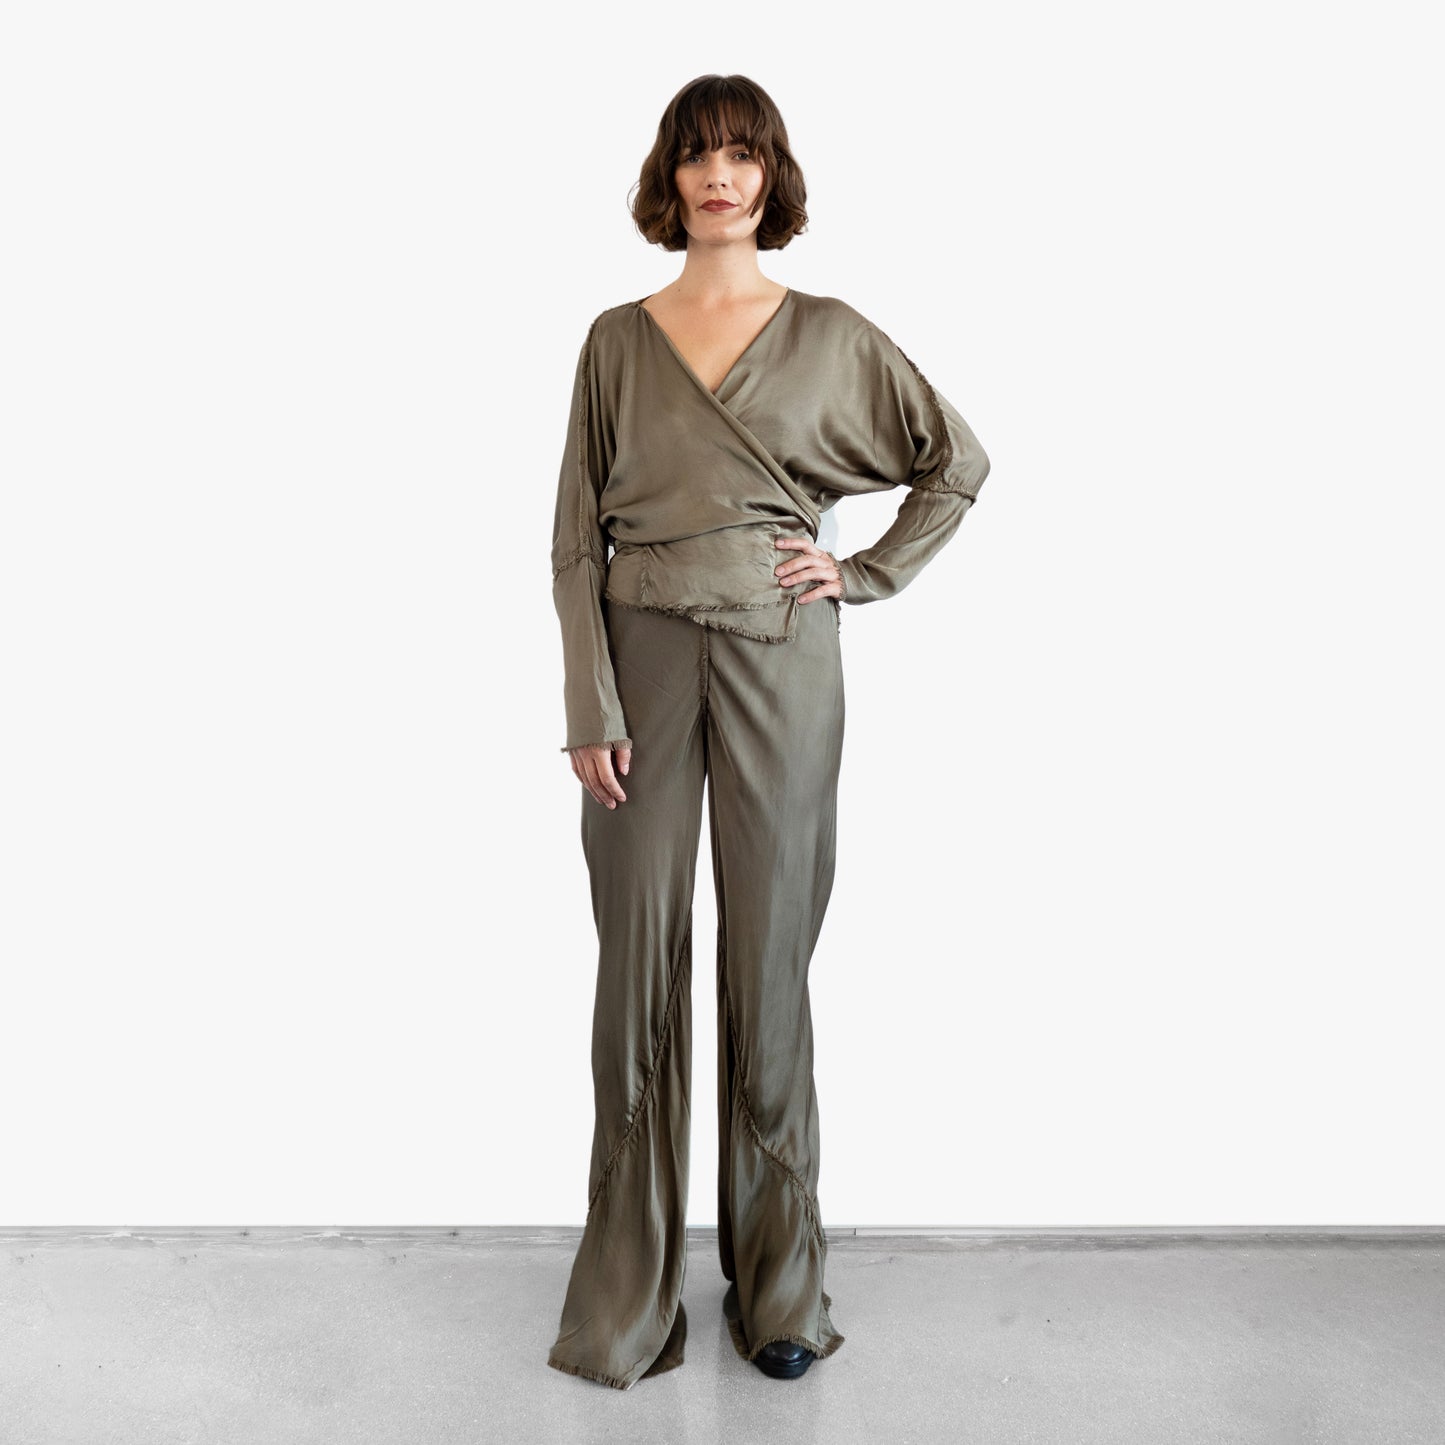 Model wearing a green silk wrap top and pants